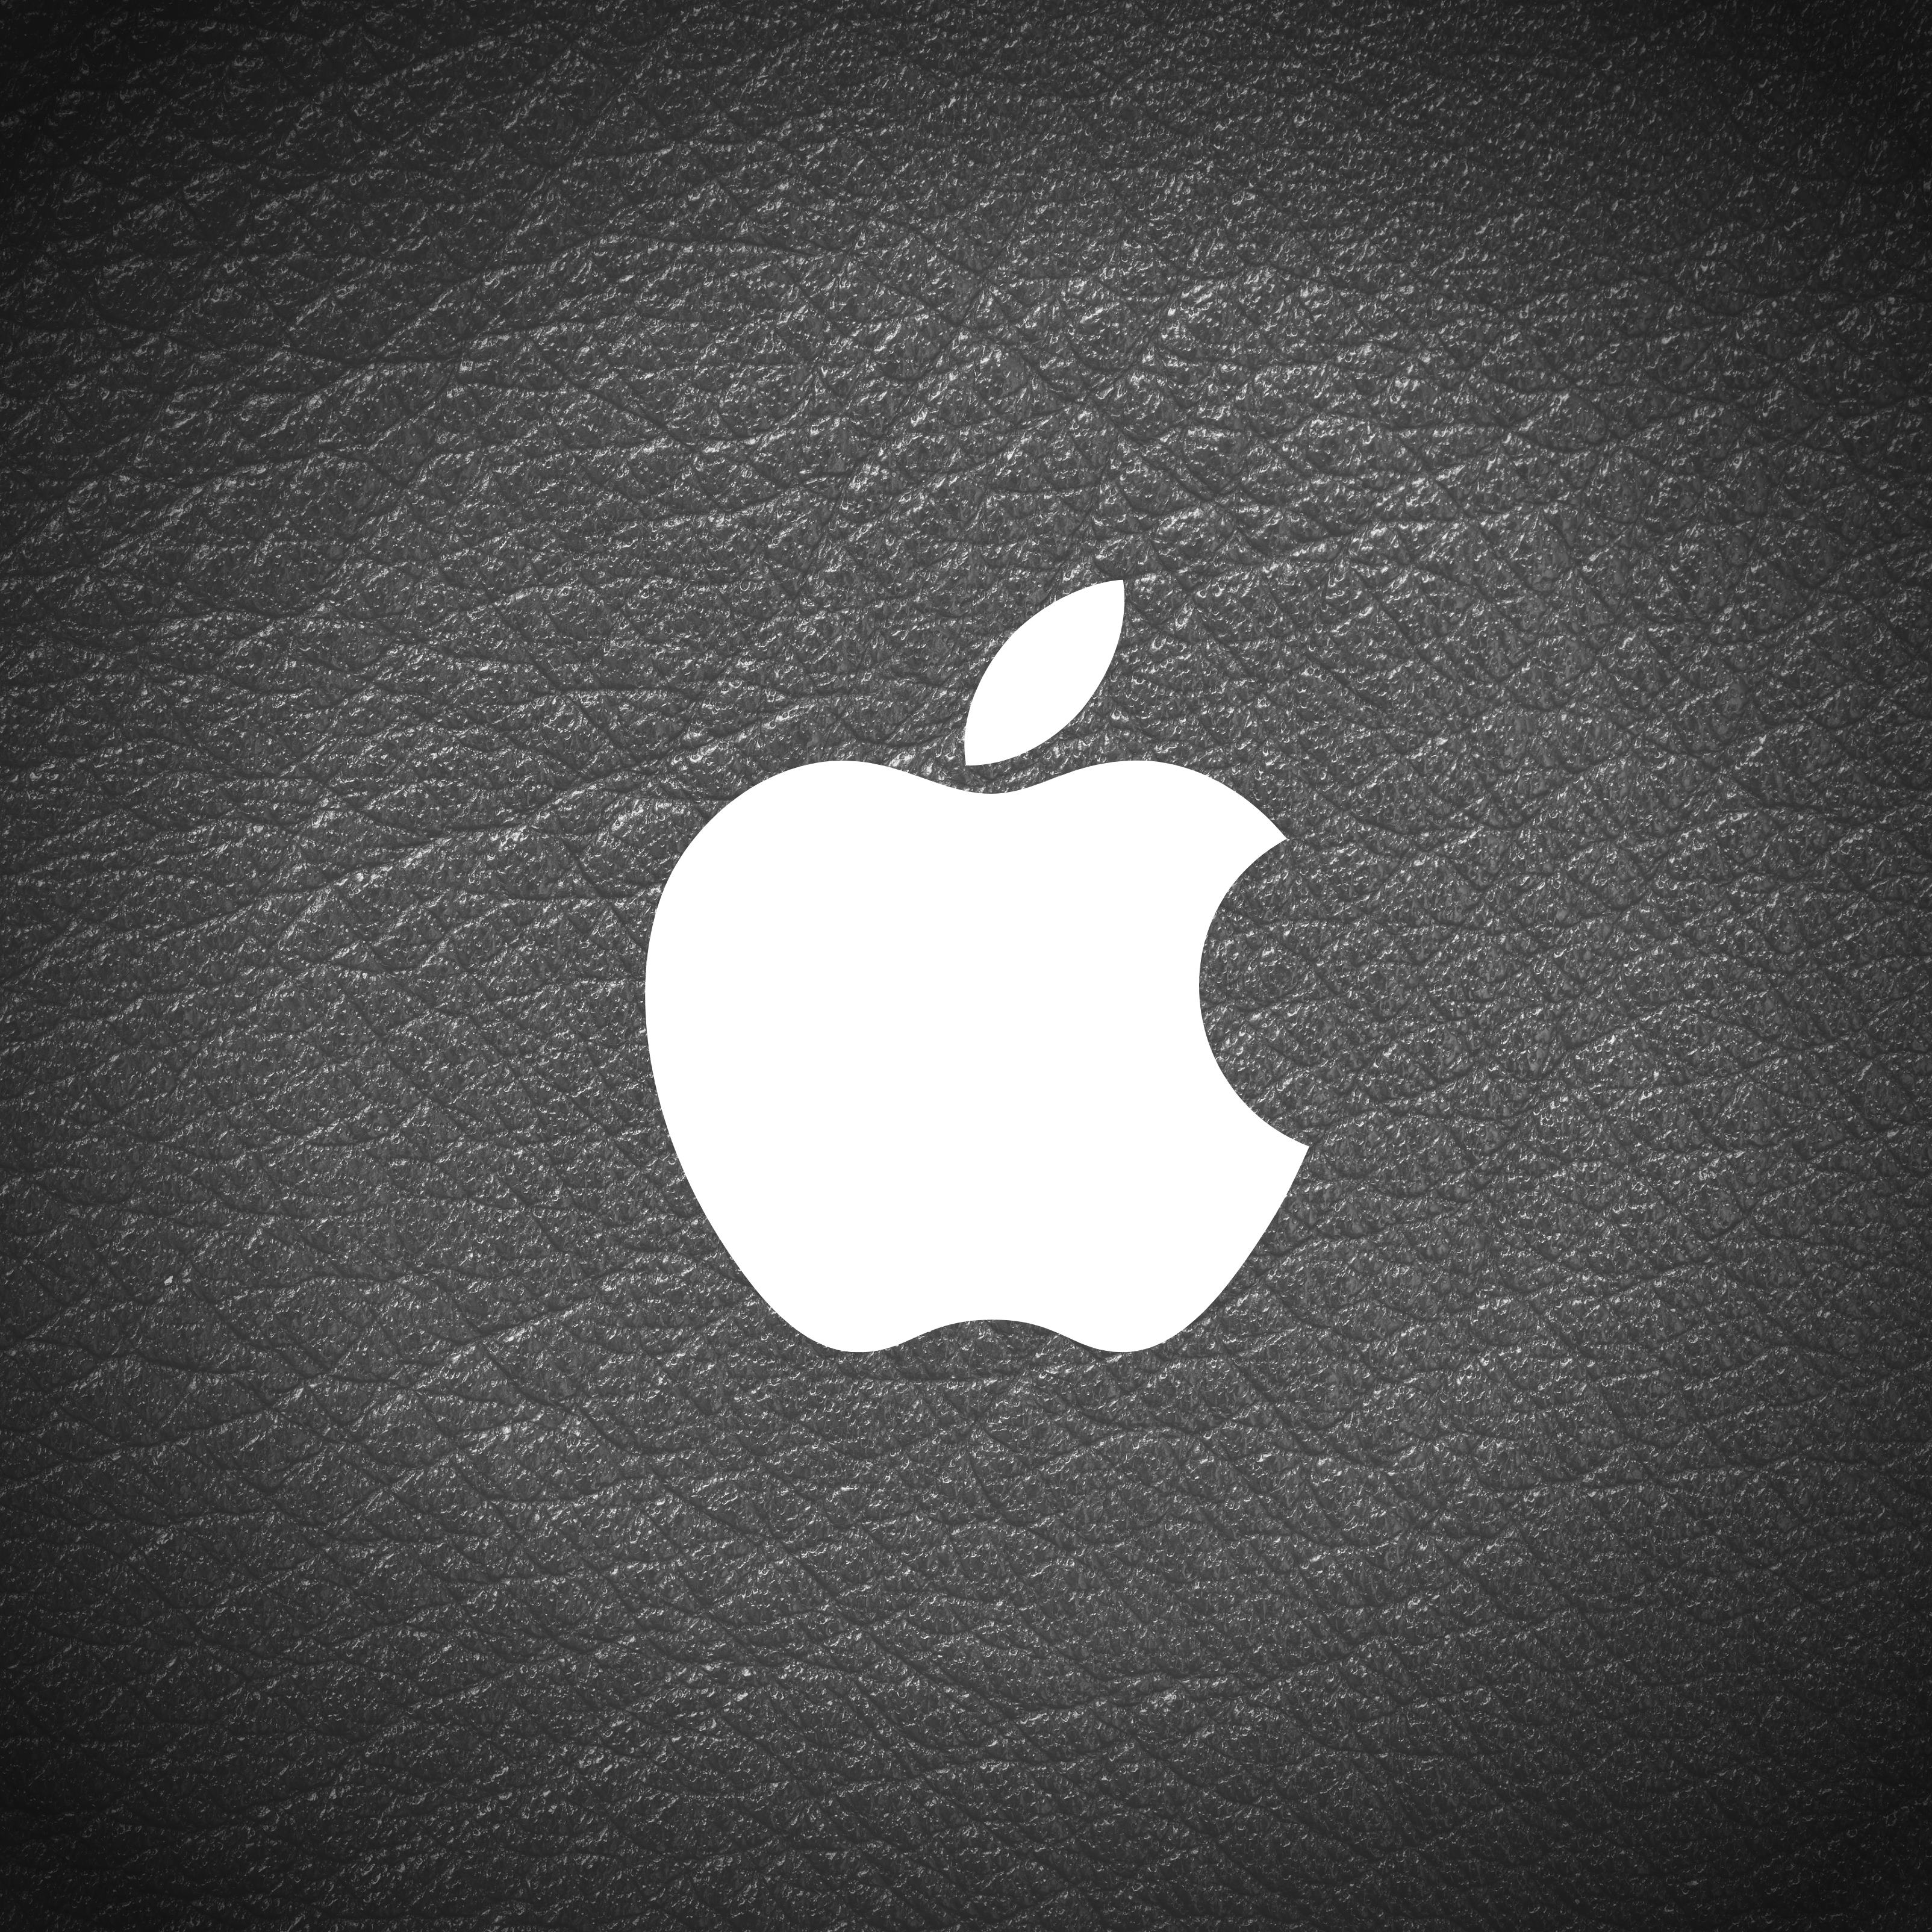 Apple iPad Air wallpapers Apple Logo Leather Black and White iPad Wallpaper